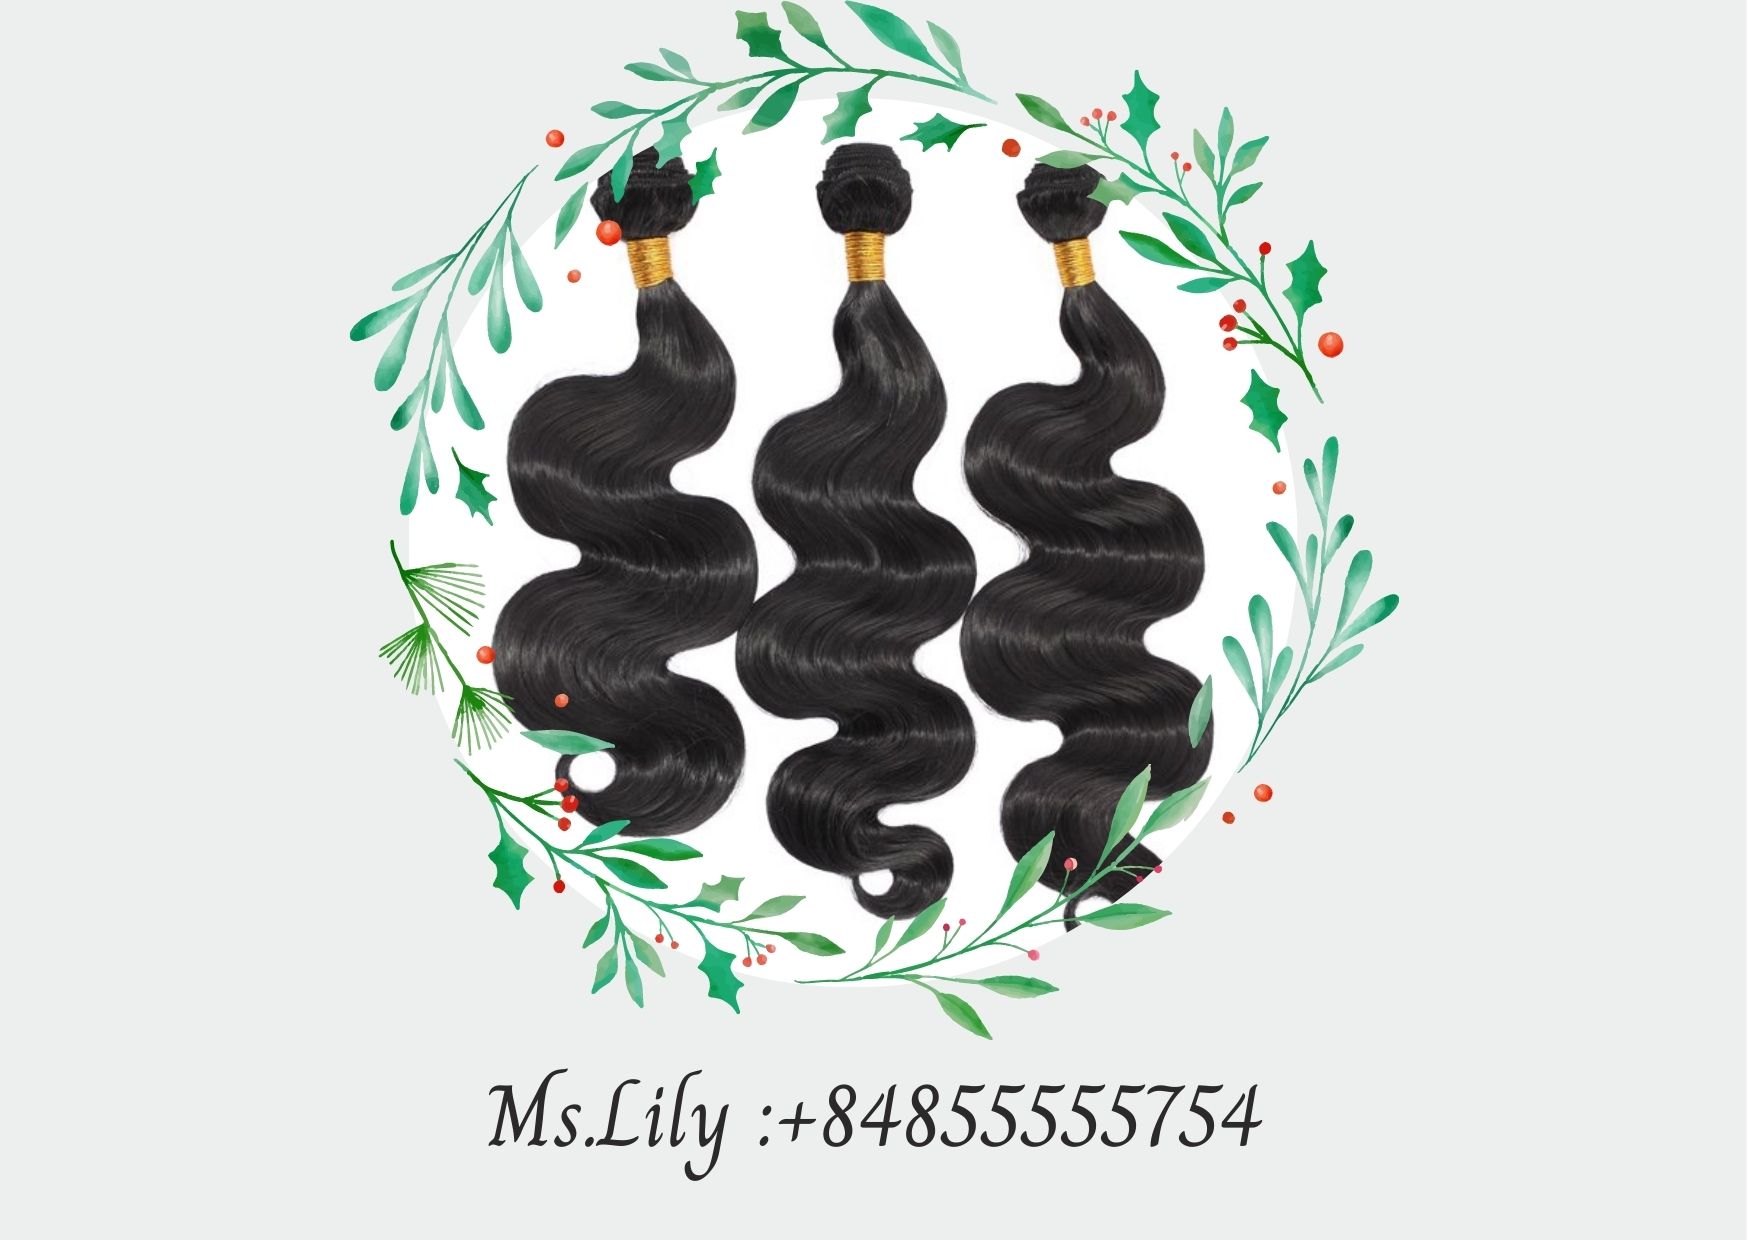 wholesale-hair-extension-in-australia-a-potential-new-wholesale-hair-vendor-1